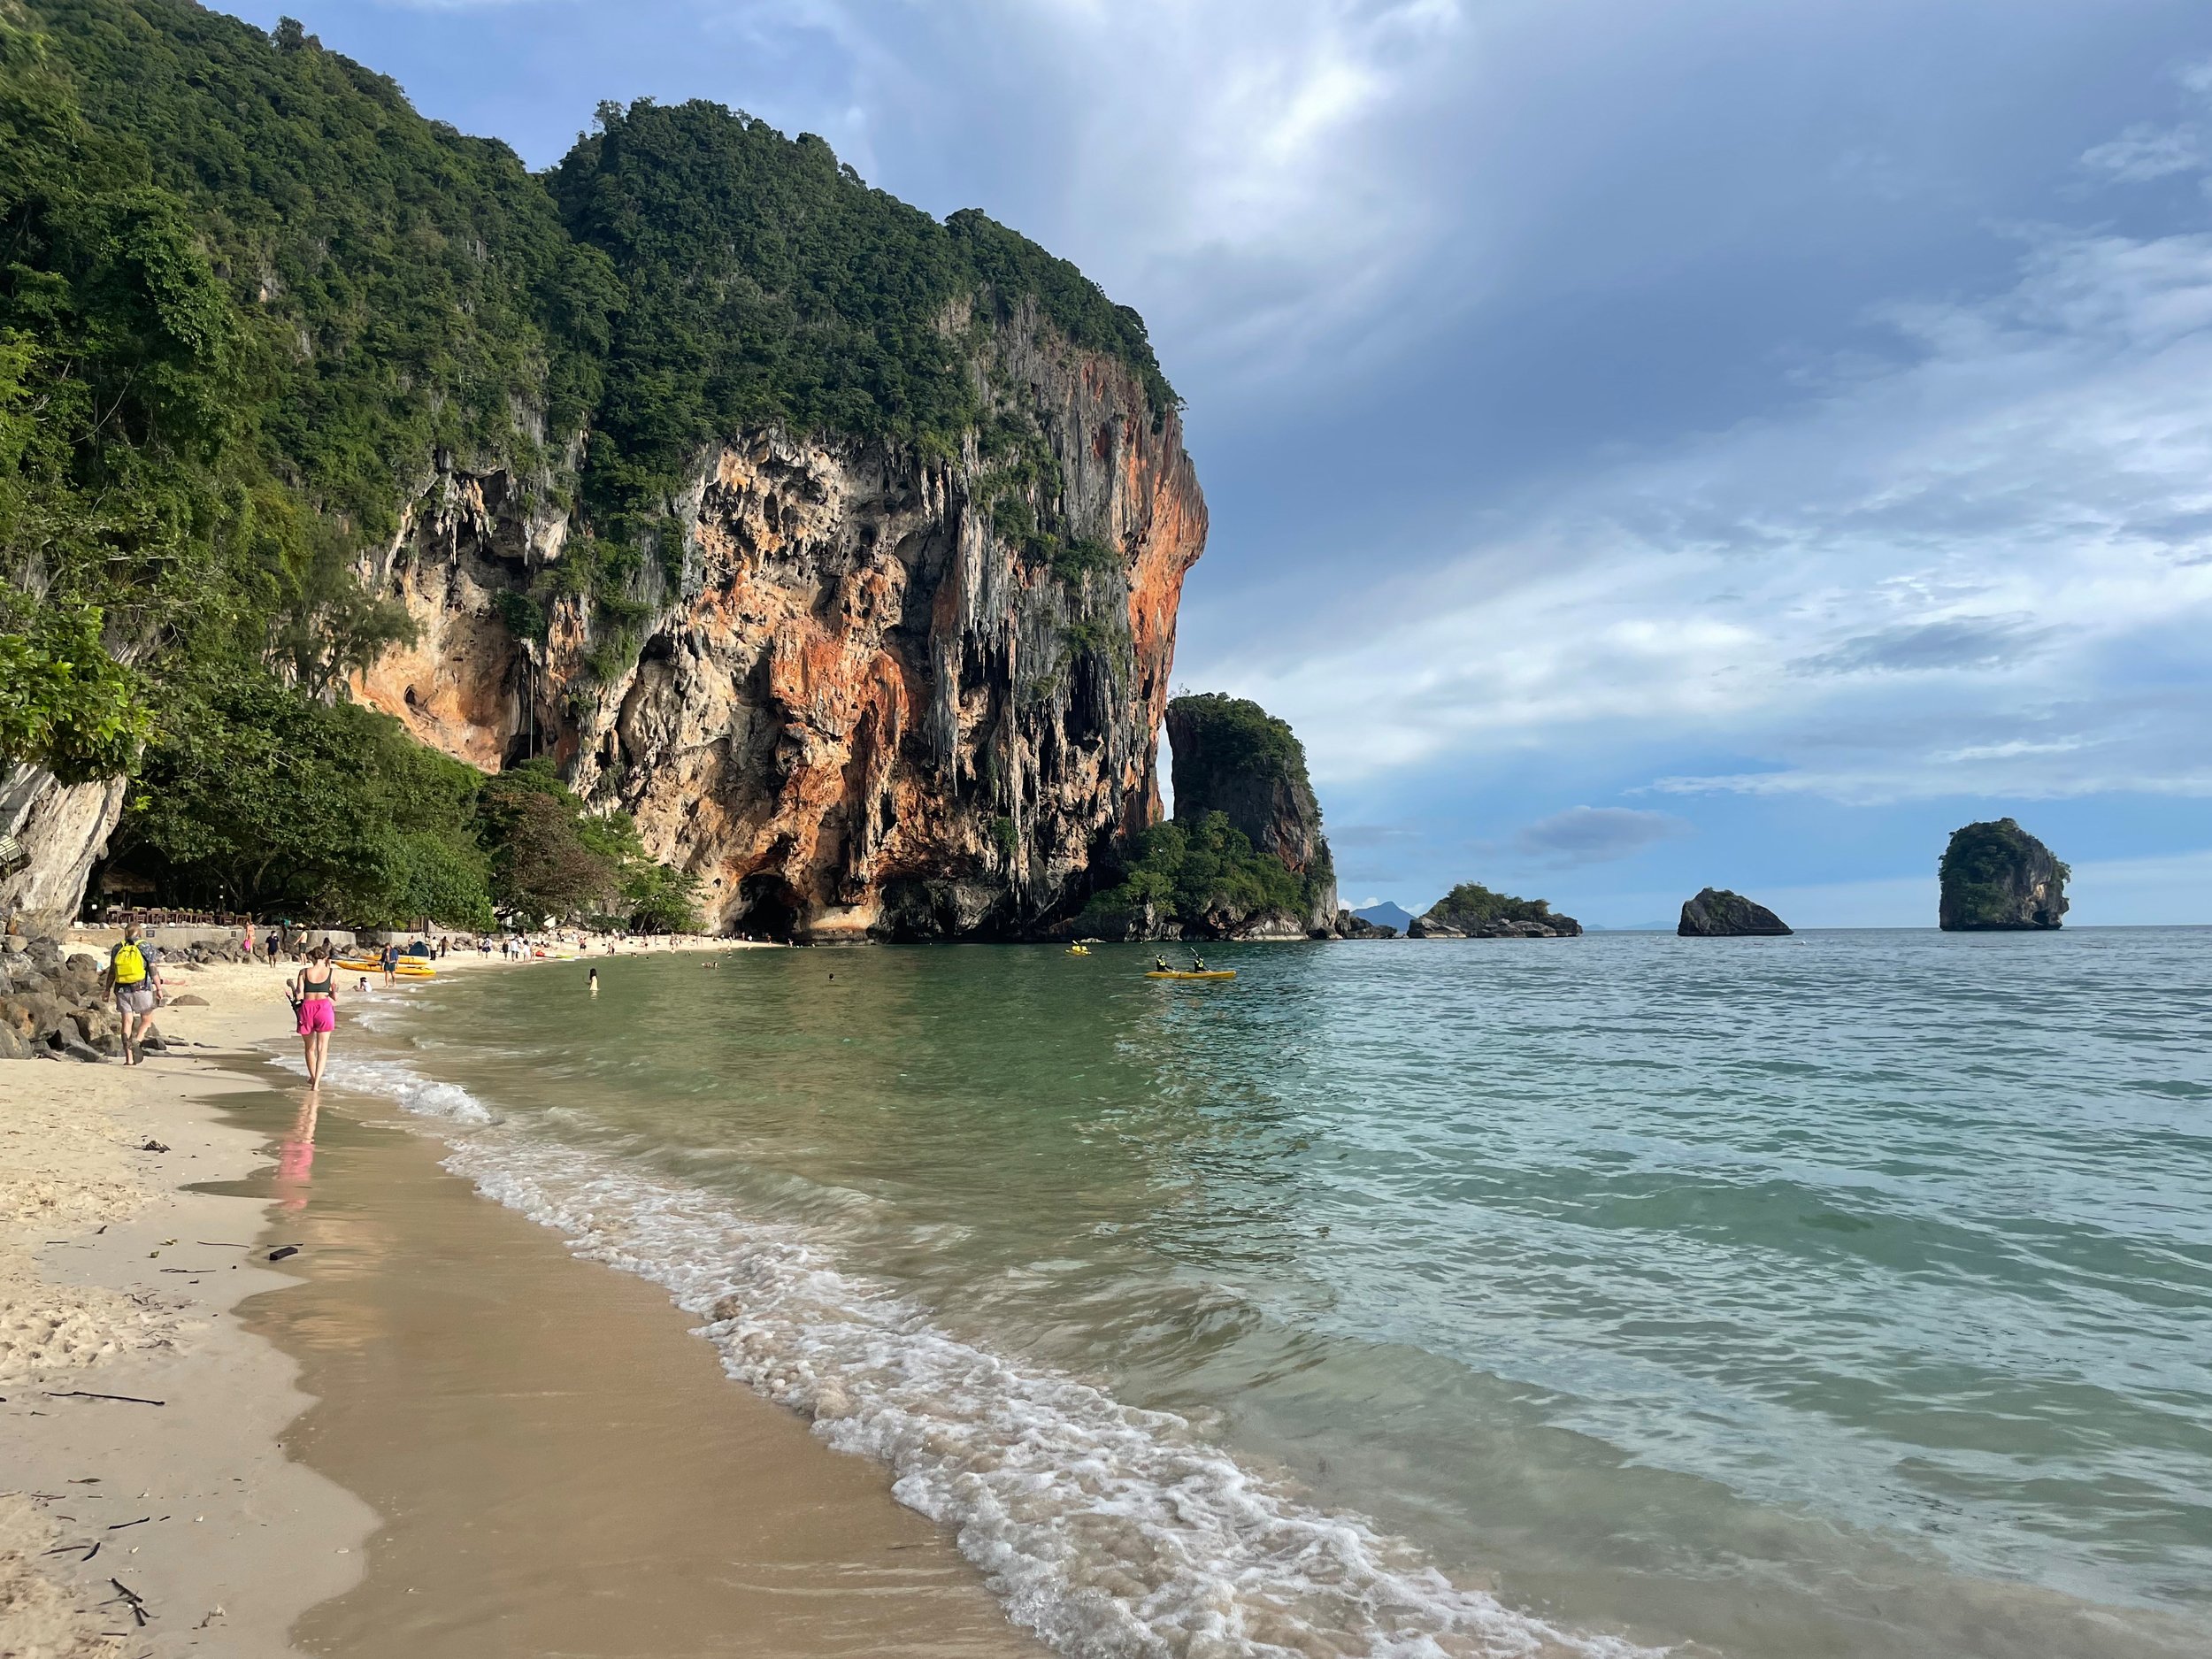 Scouting at nearby Phra Nang cave beach